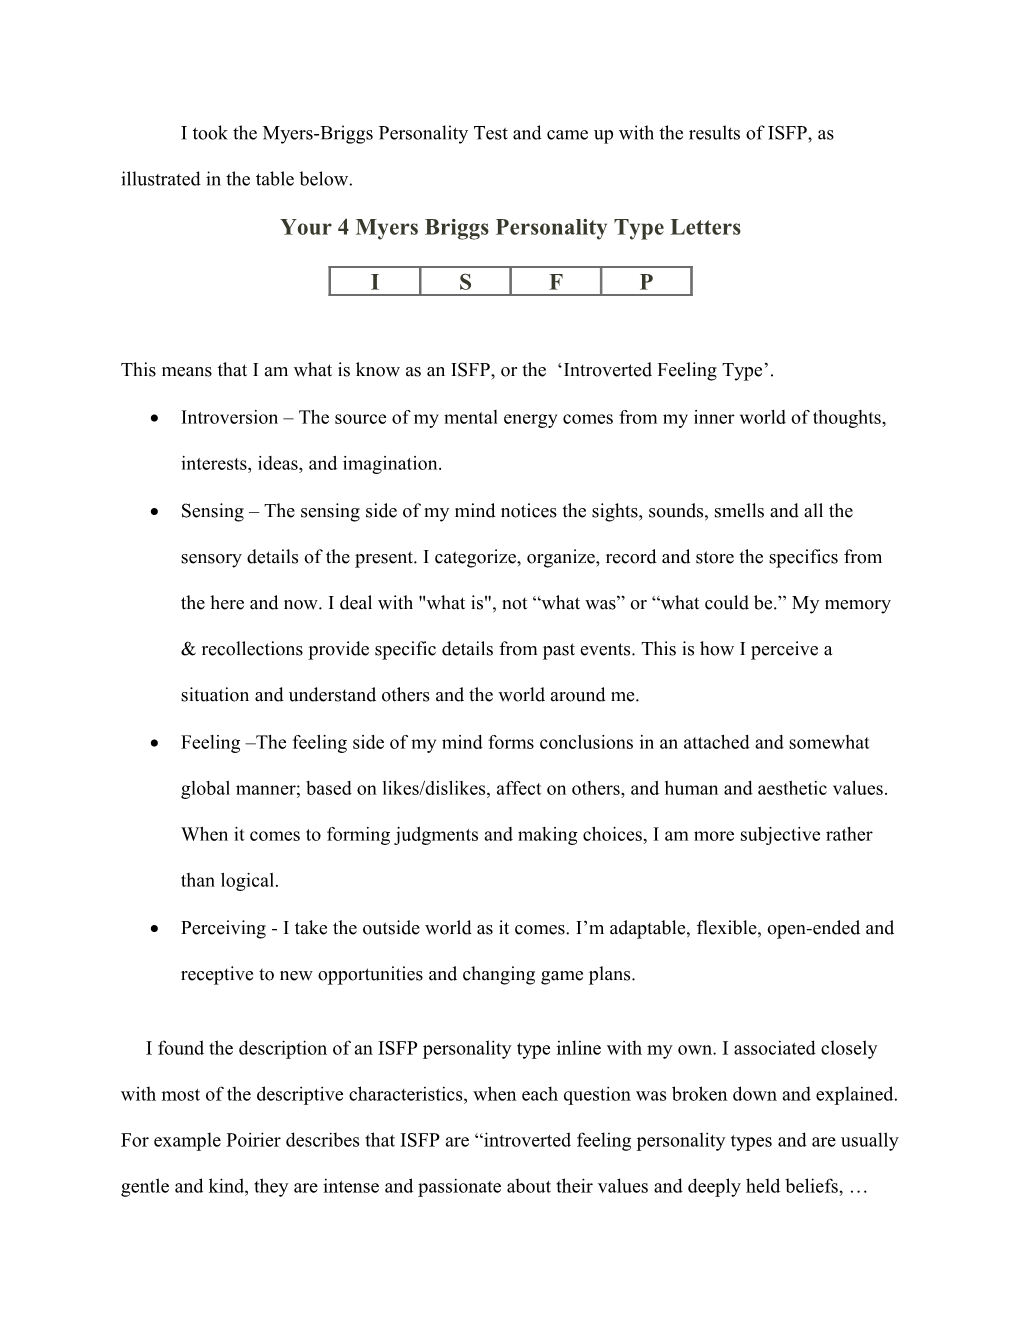 Your 4 Myers Briggs Personality Type Letters